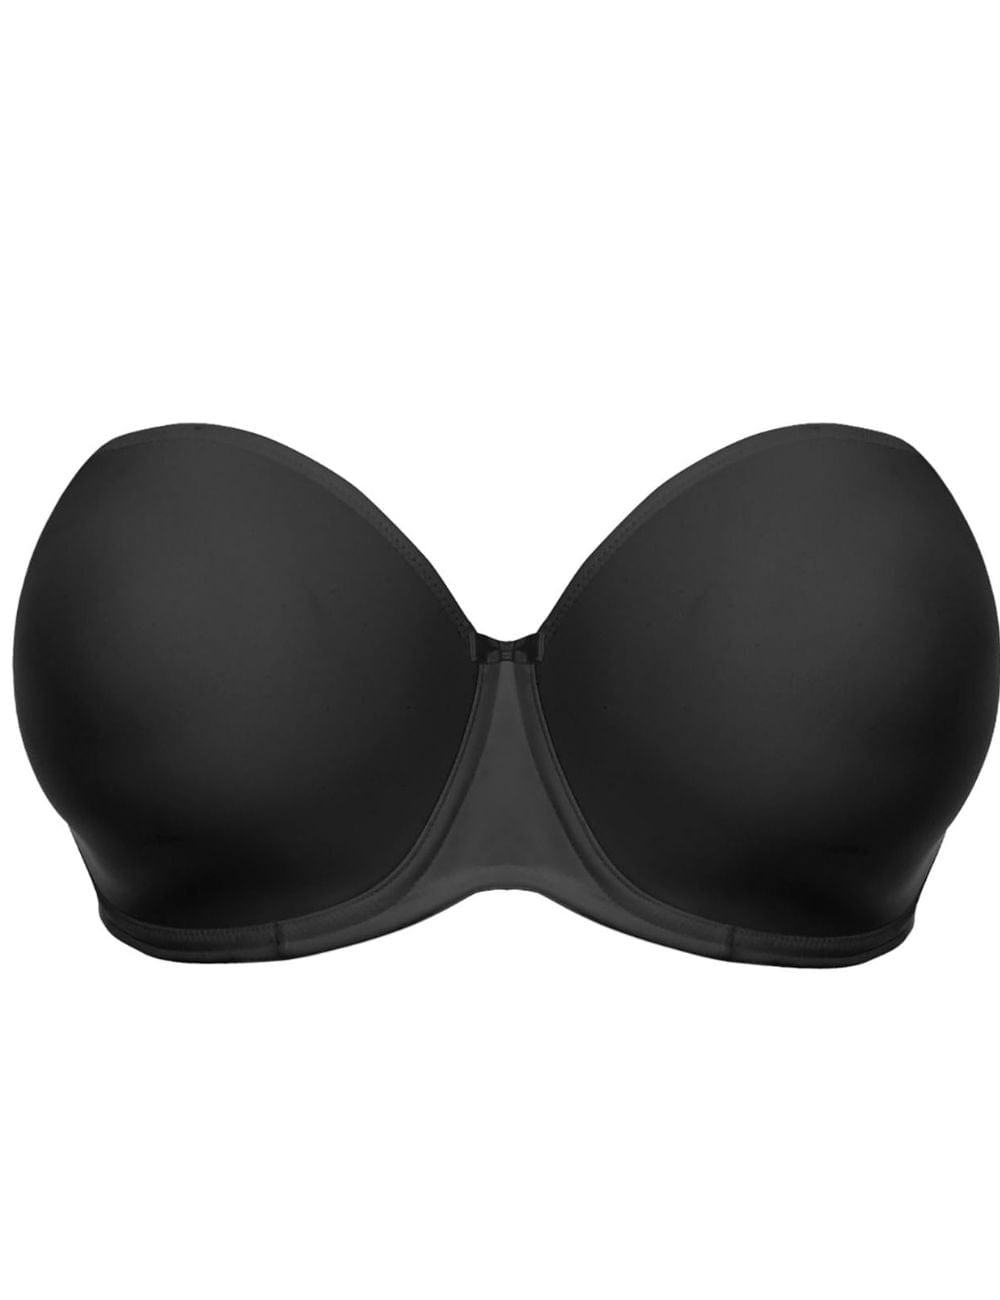 Elomi Smooth Moulded Strapless Bra Black